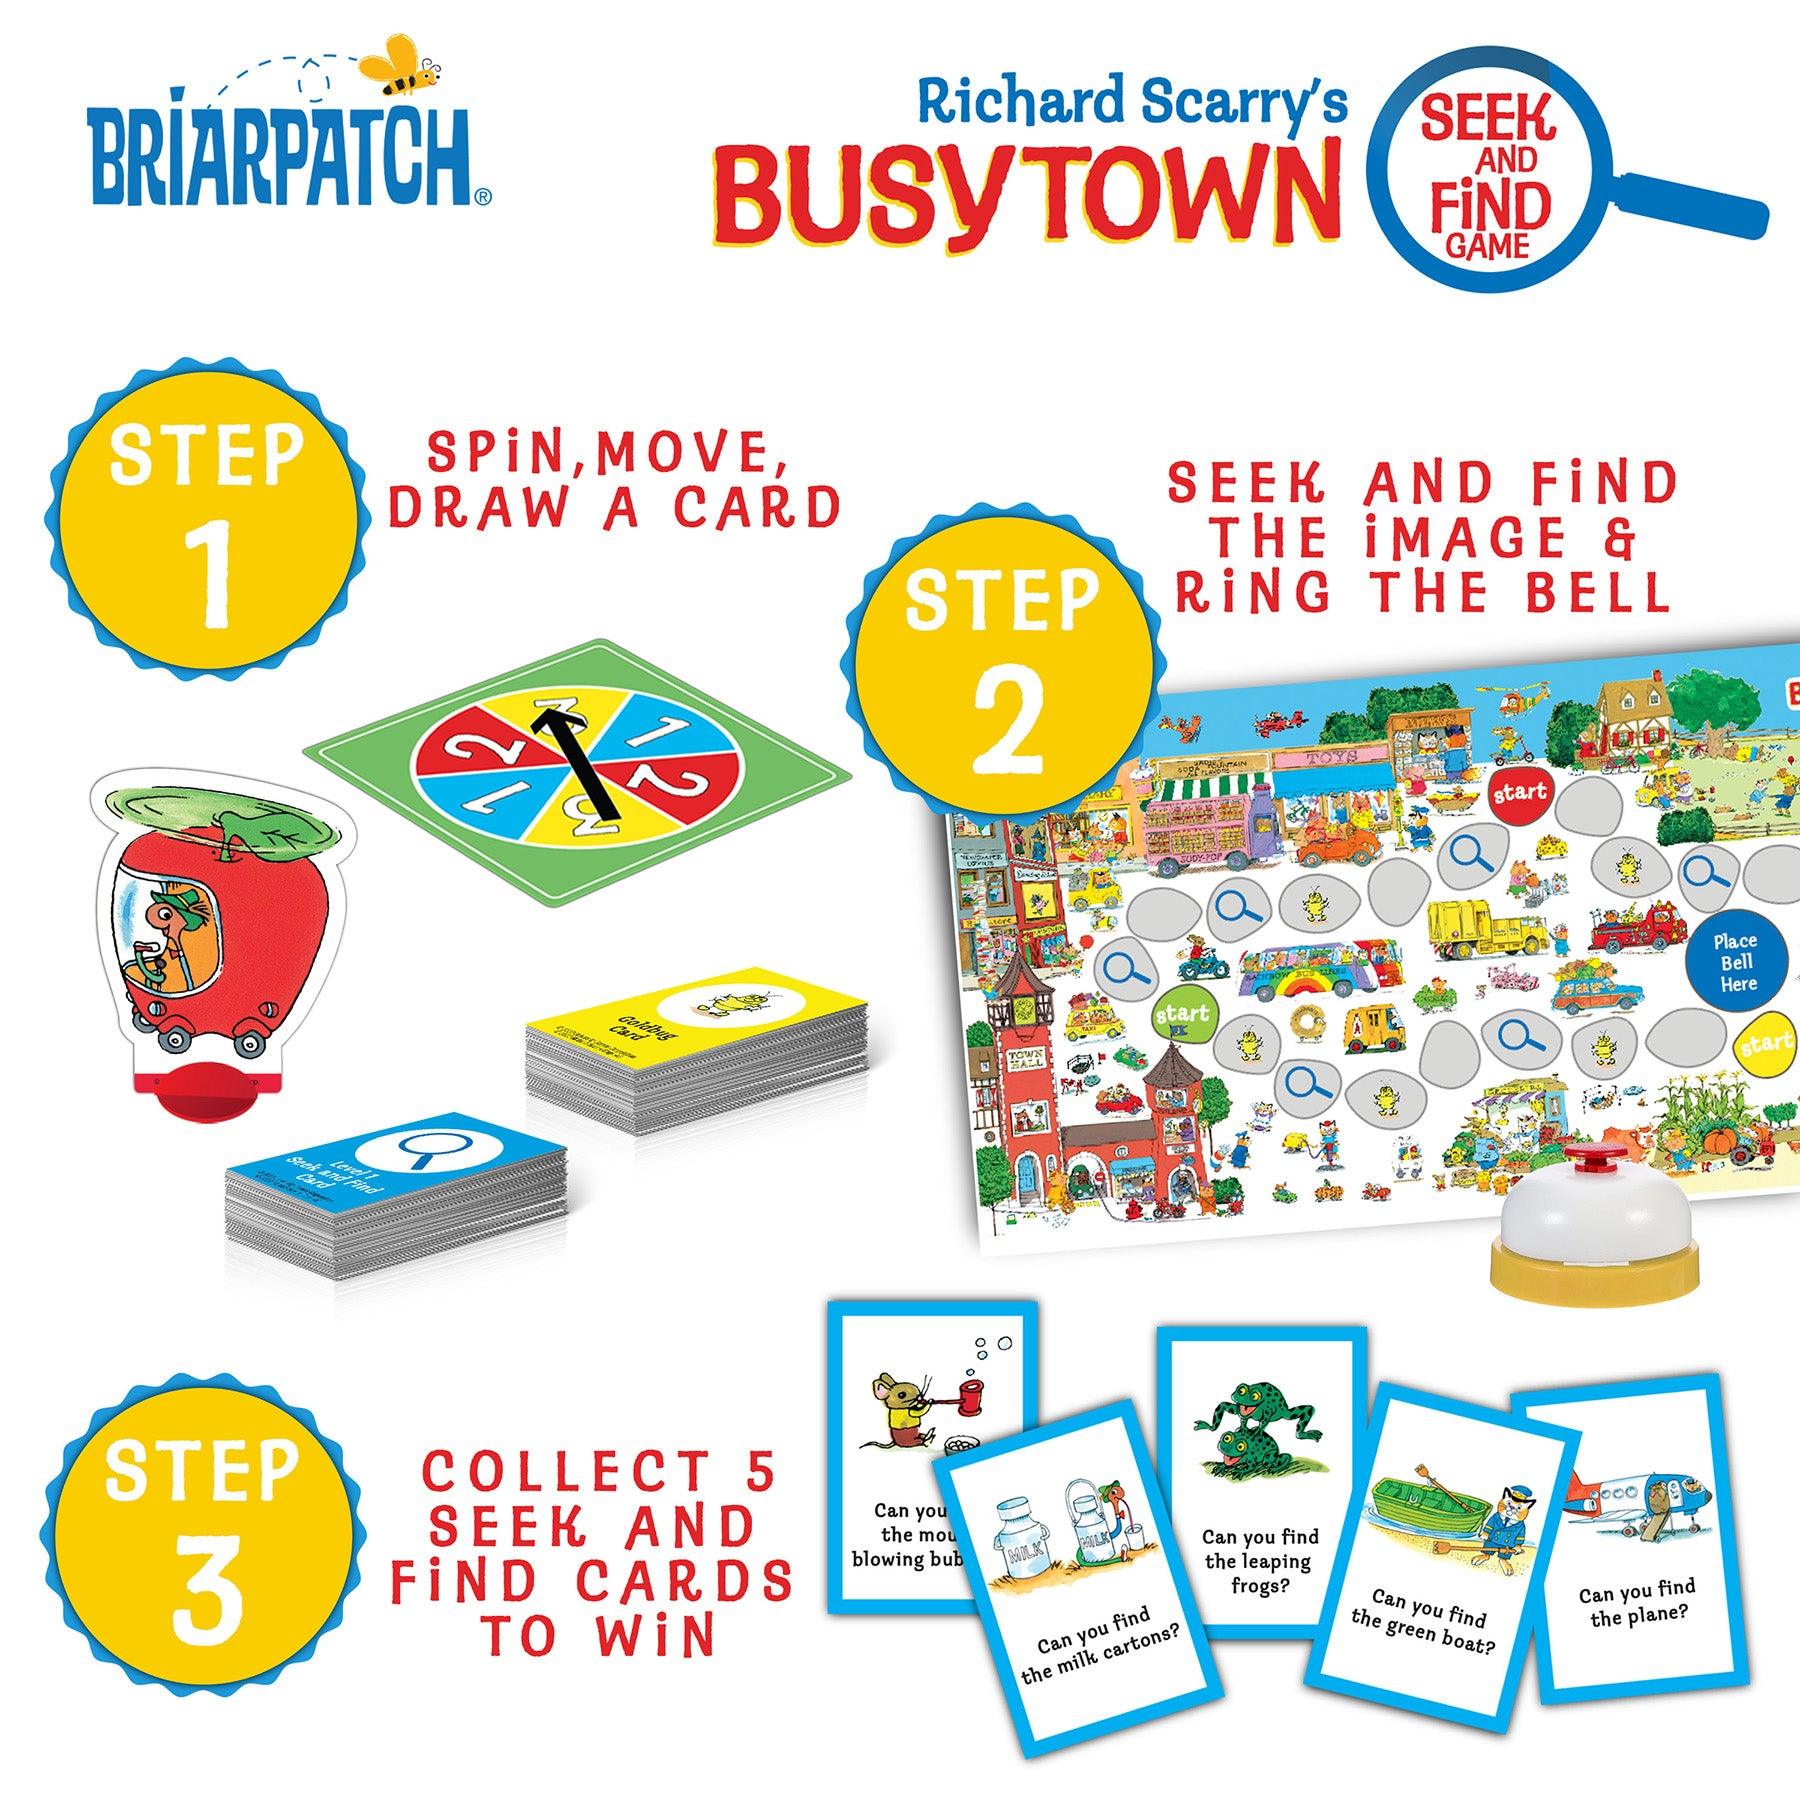 Richard Scarry Busytown Seek and Find Game - Loomini